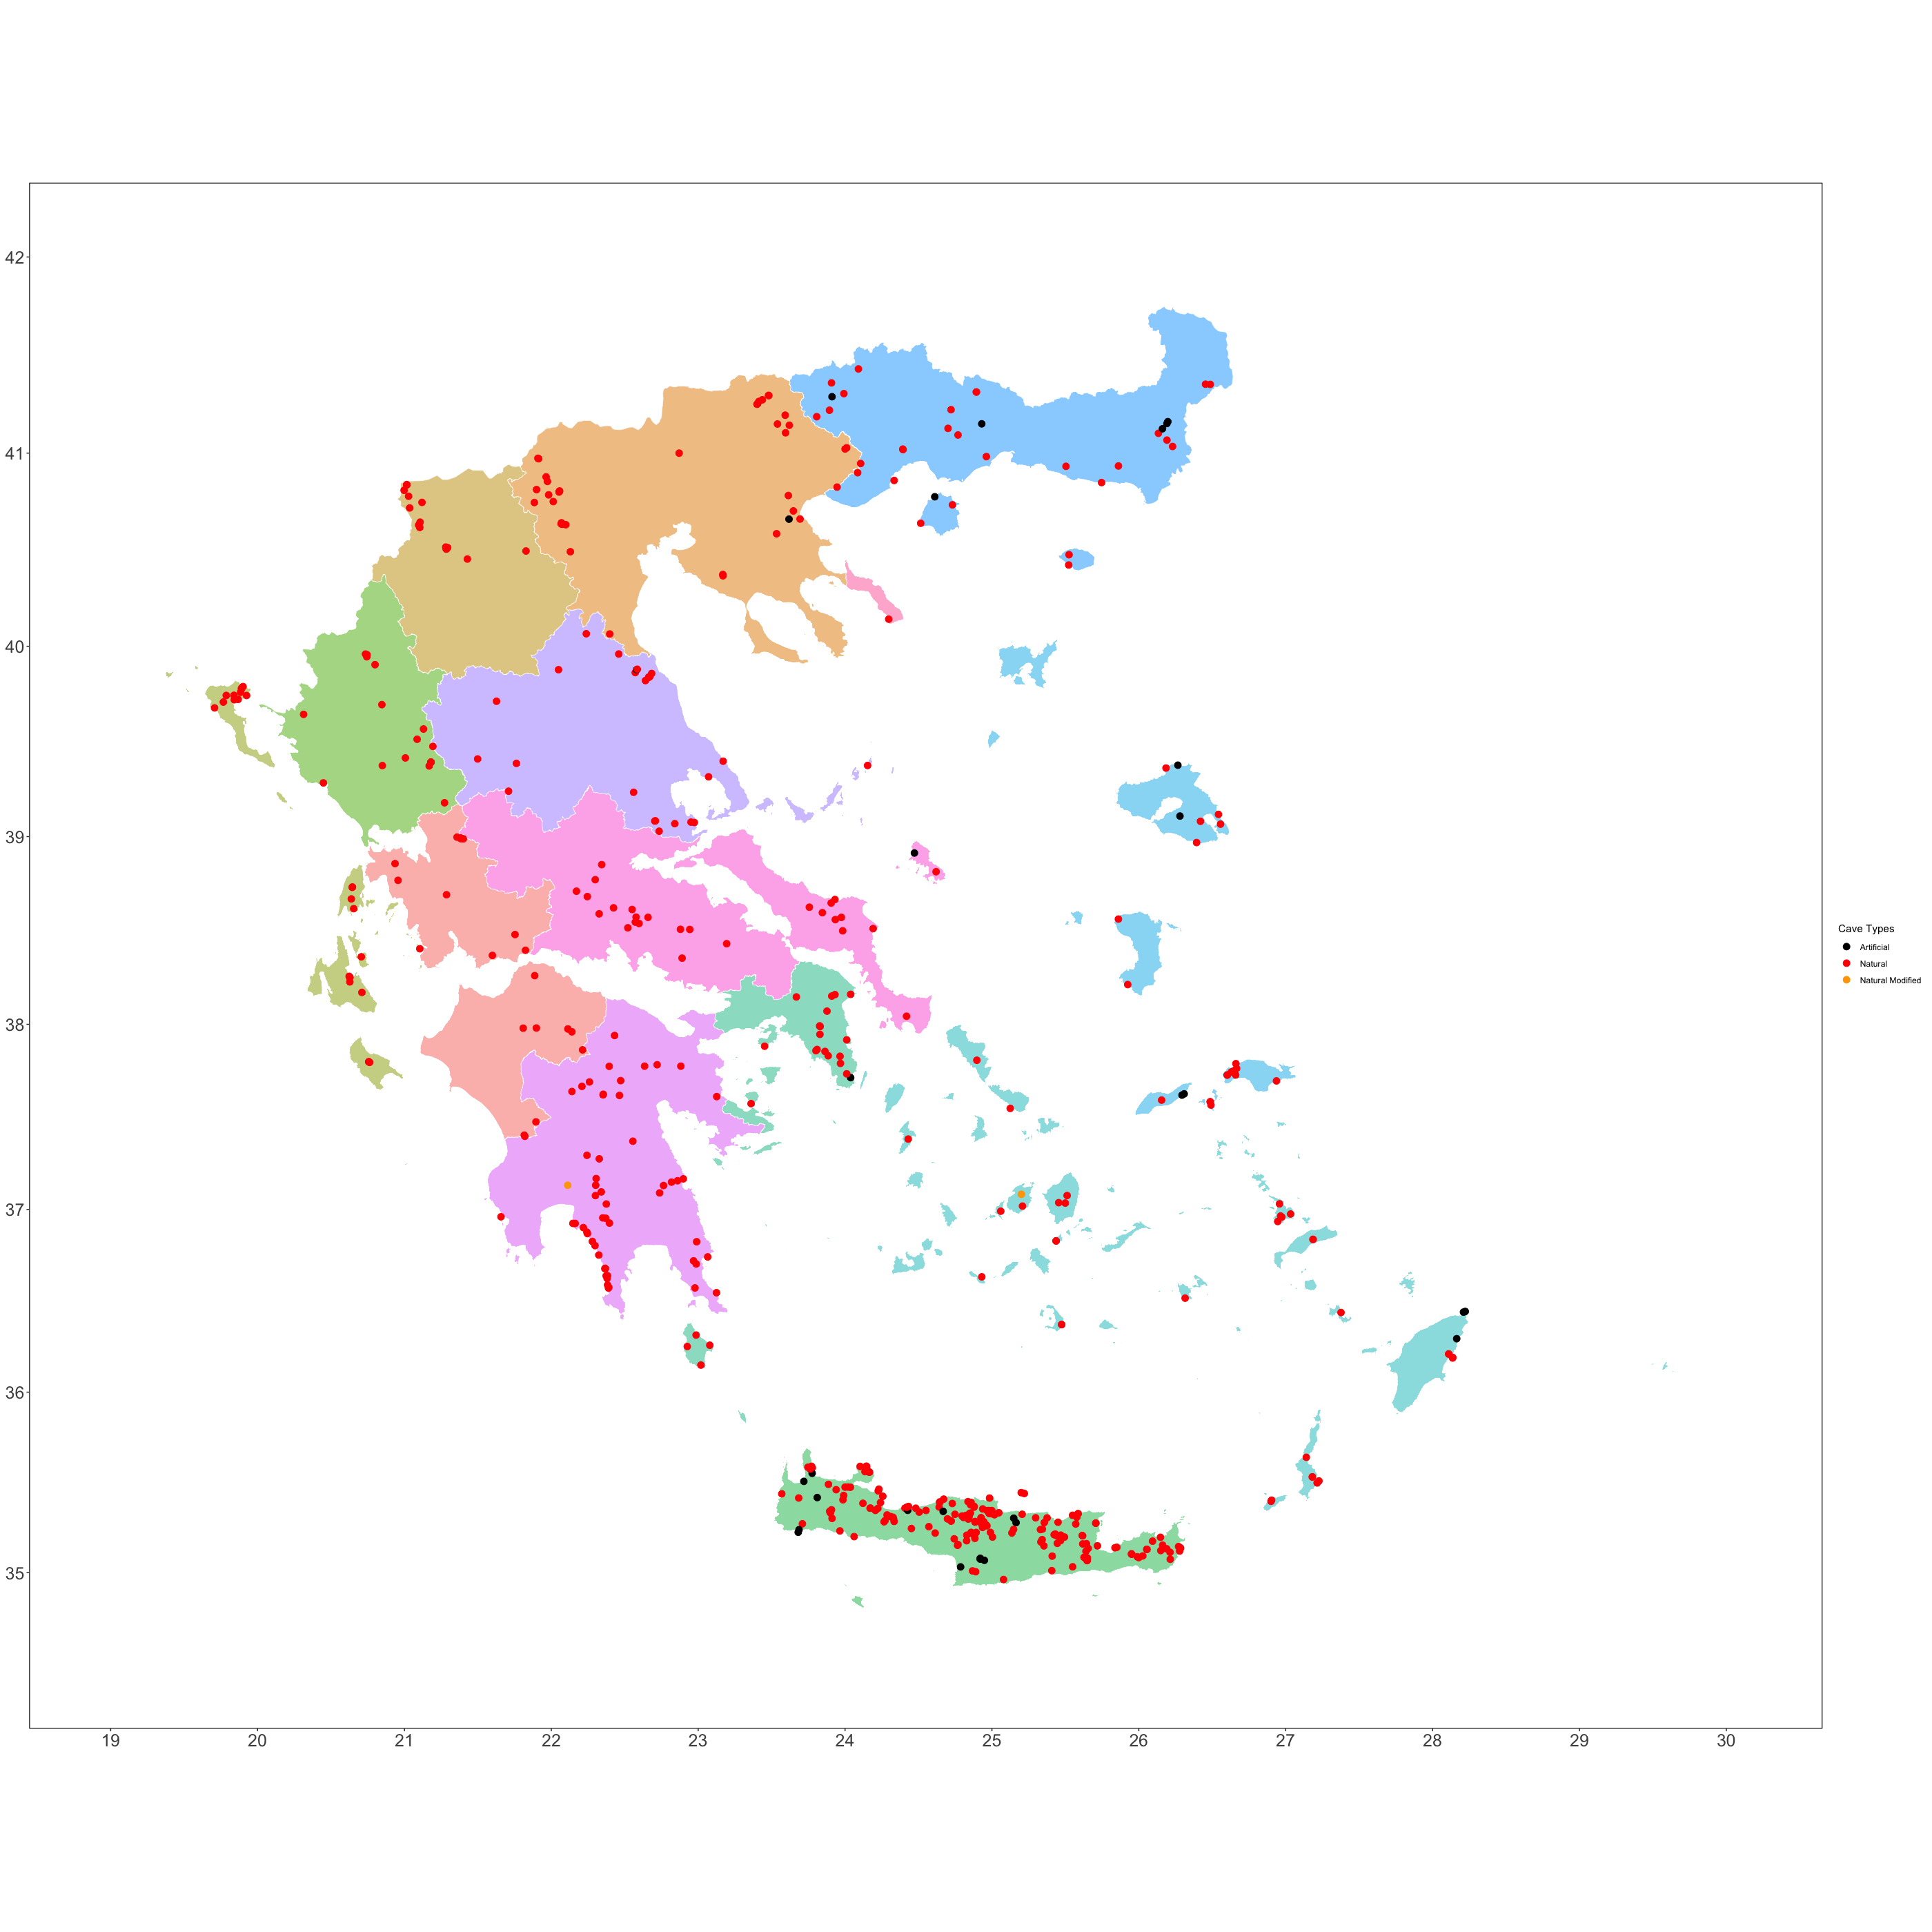 Regions with caves coordinates in Greece.